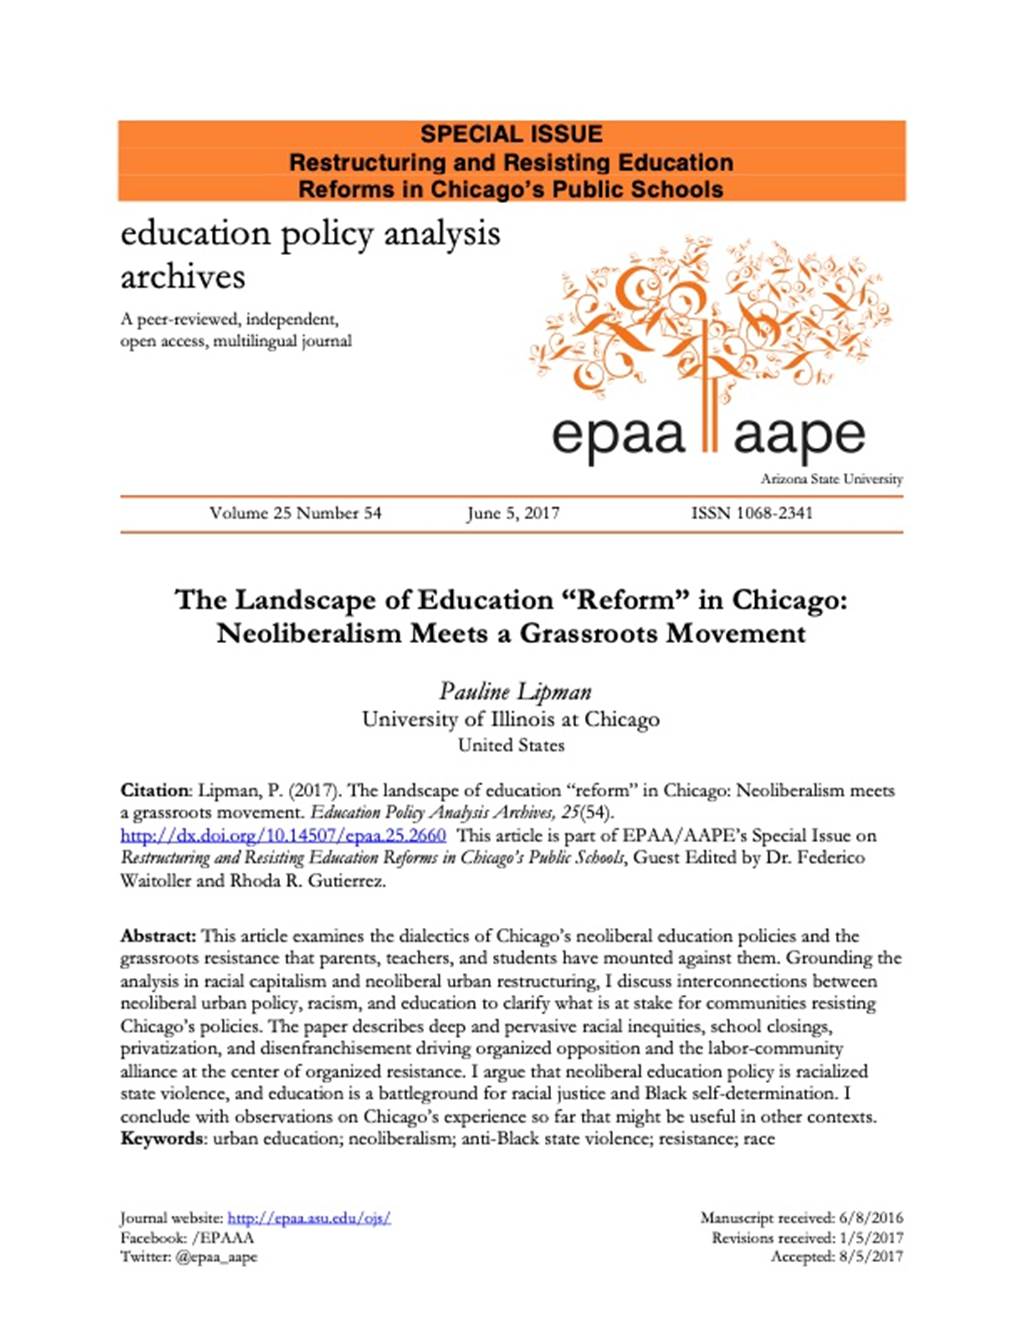 The Landscape of Education “Reform” in Chicago: Neoliberalism Meets a Grassroots Movement - Document image